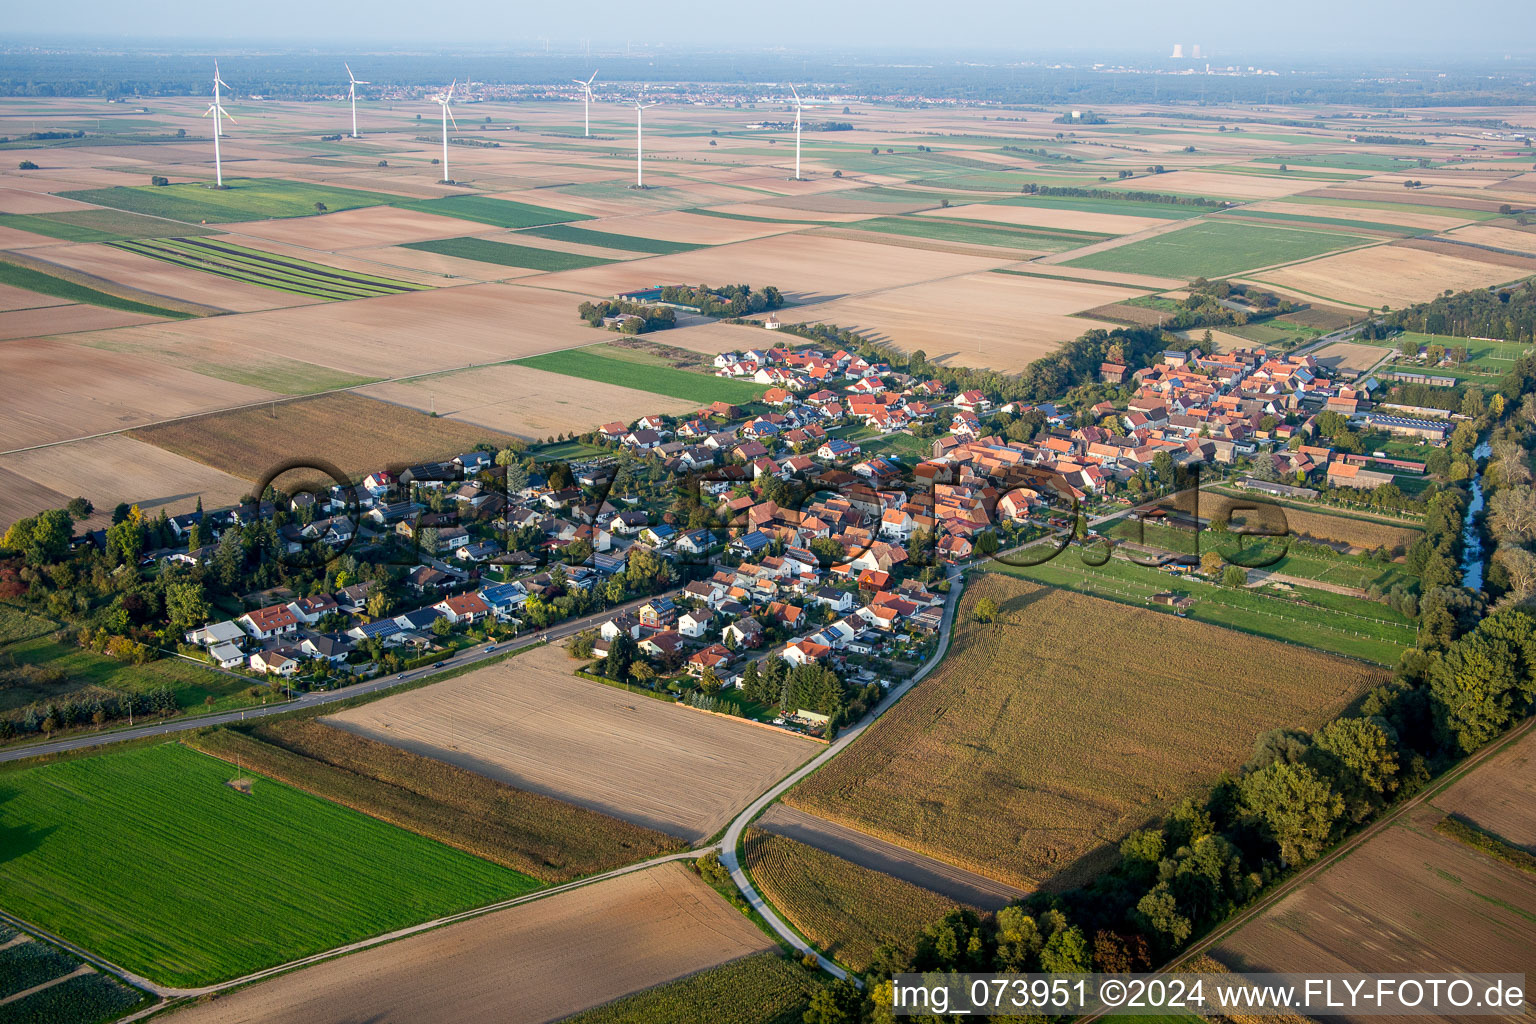 Village - view on the edge of Windmills and agricultural fields and farmland in Herxheimweyher in the state Rhineland-Palatinate, Germany